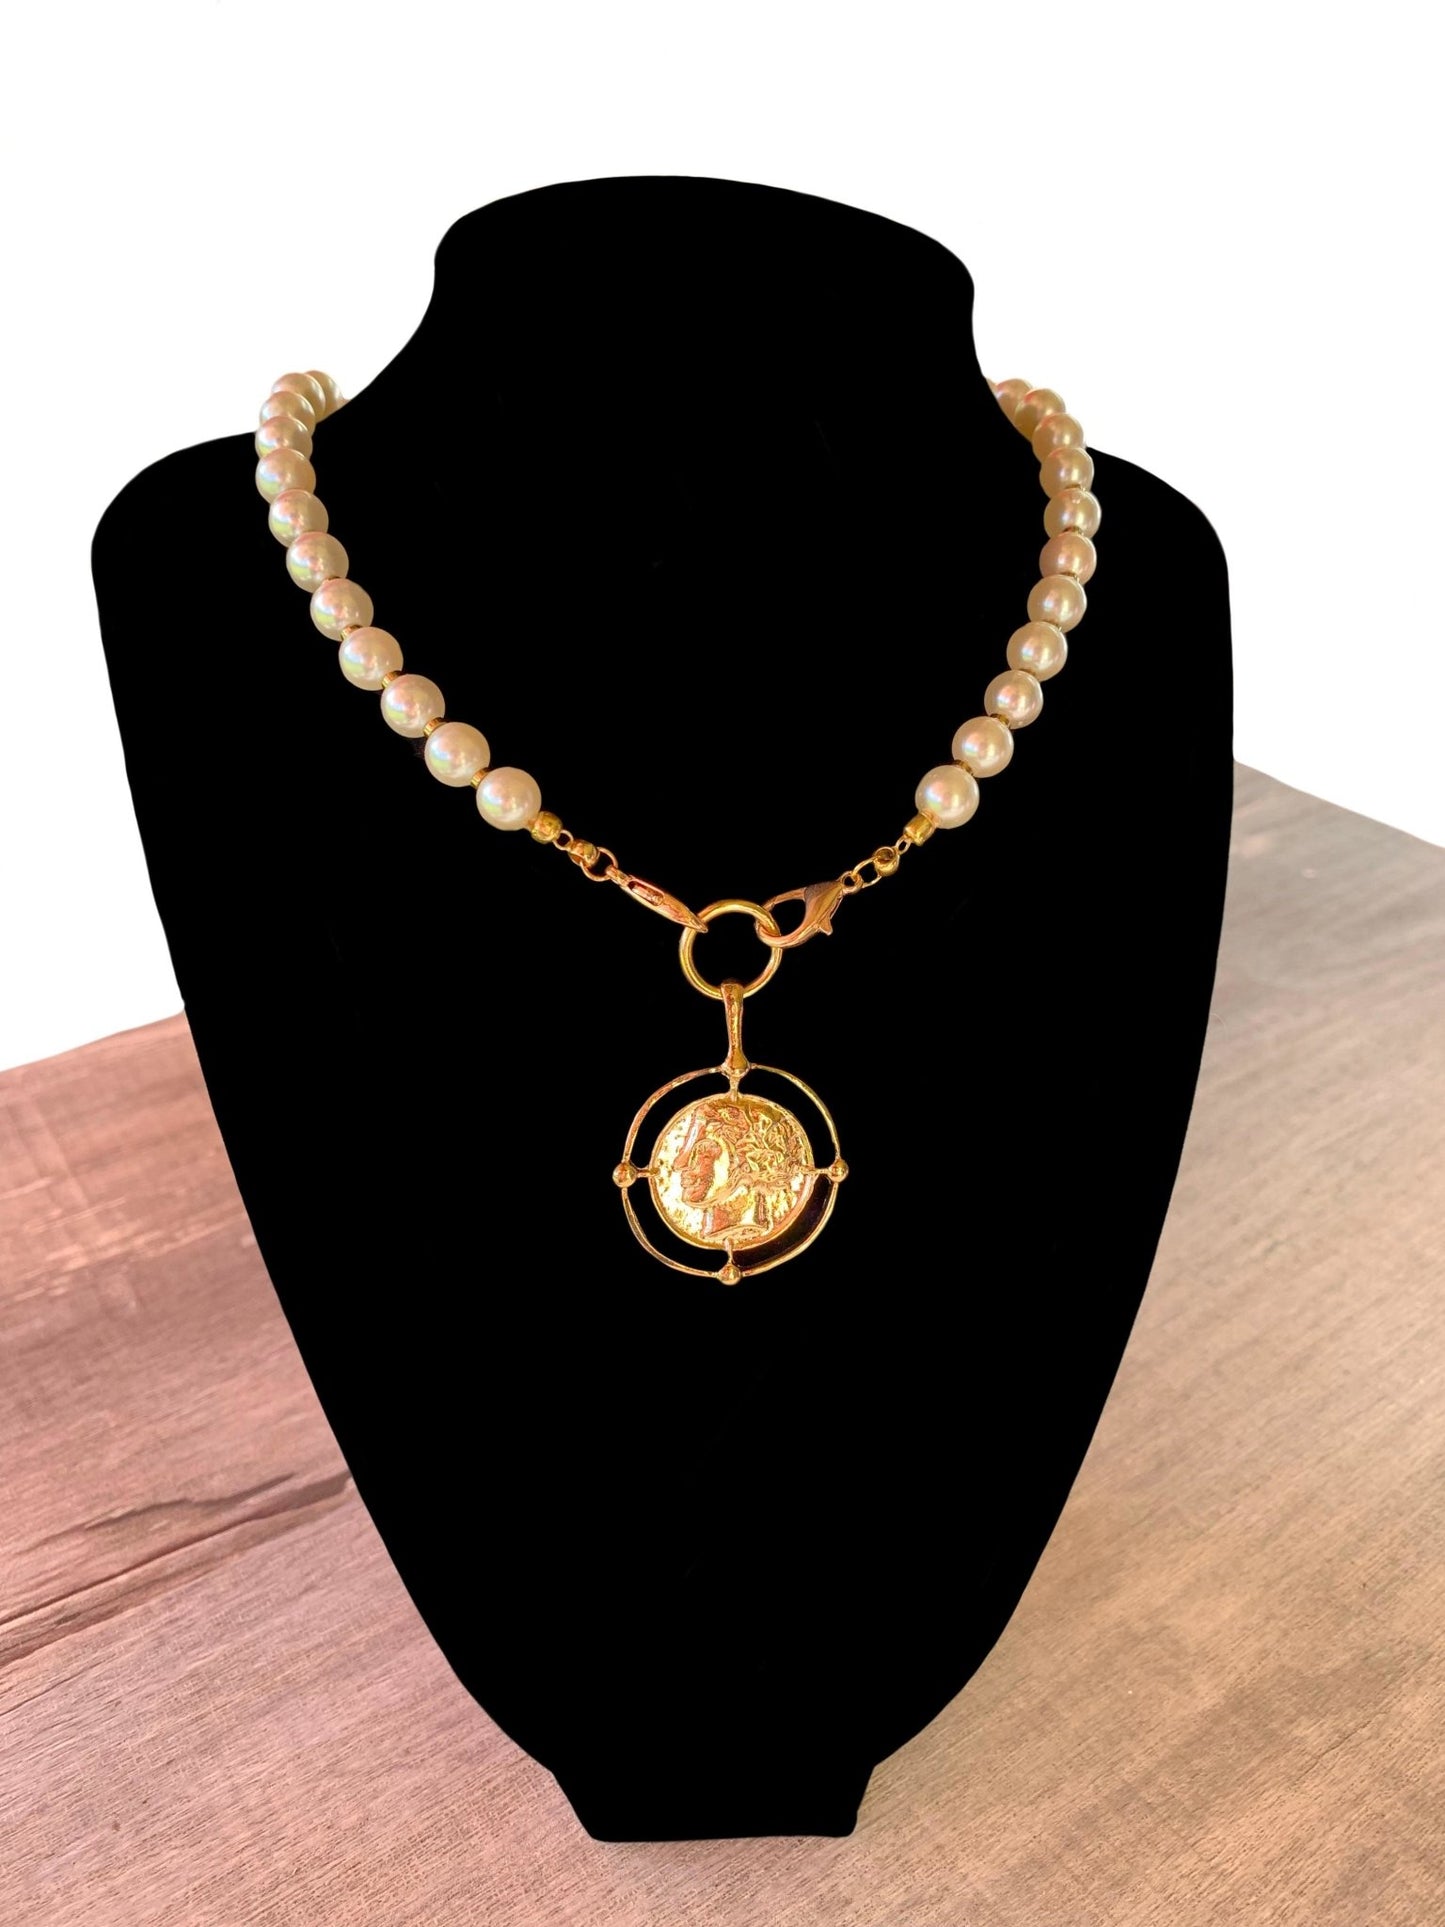 🔴SOLD🔴 Beth Handmade Faux Pearl and Gold Plated Hematite 23" Necklace/ Choker With Coin Pendant - Born Mystics